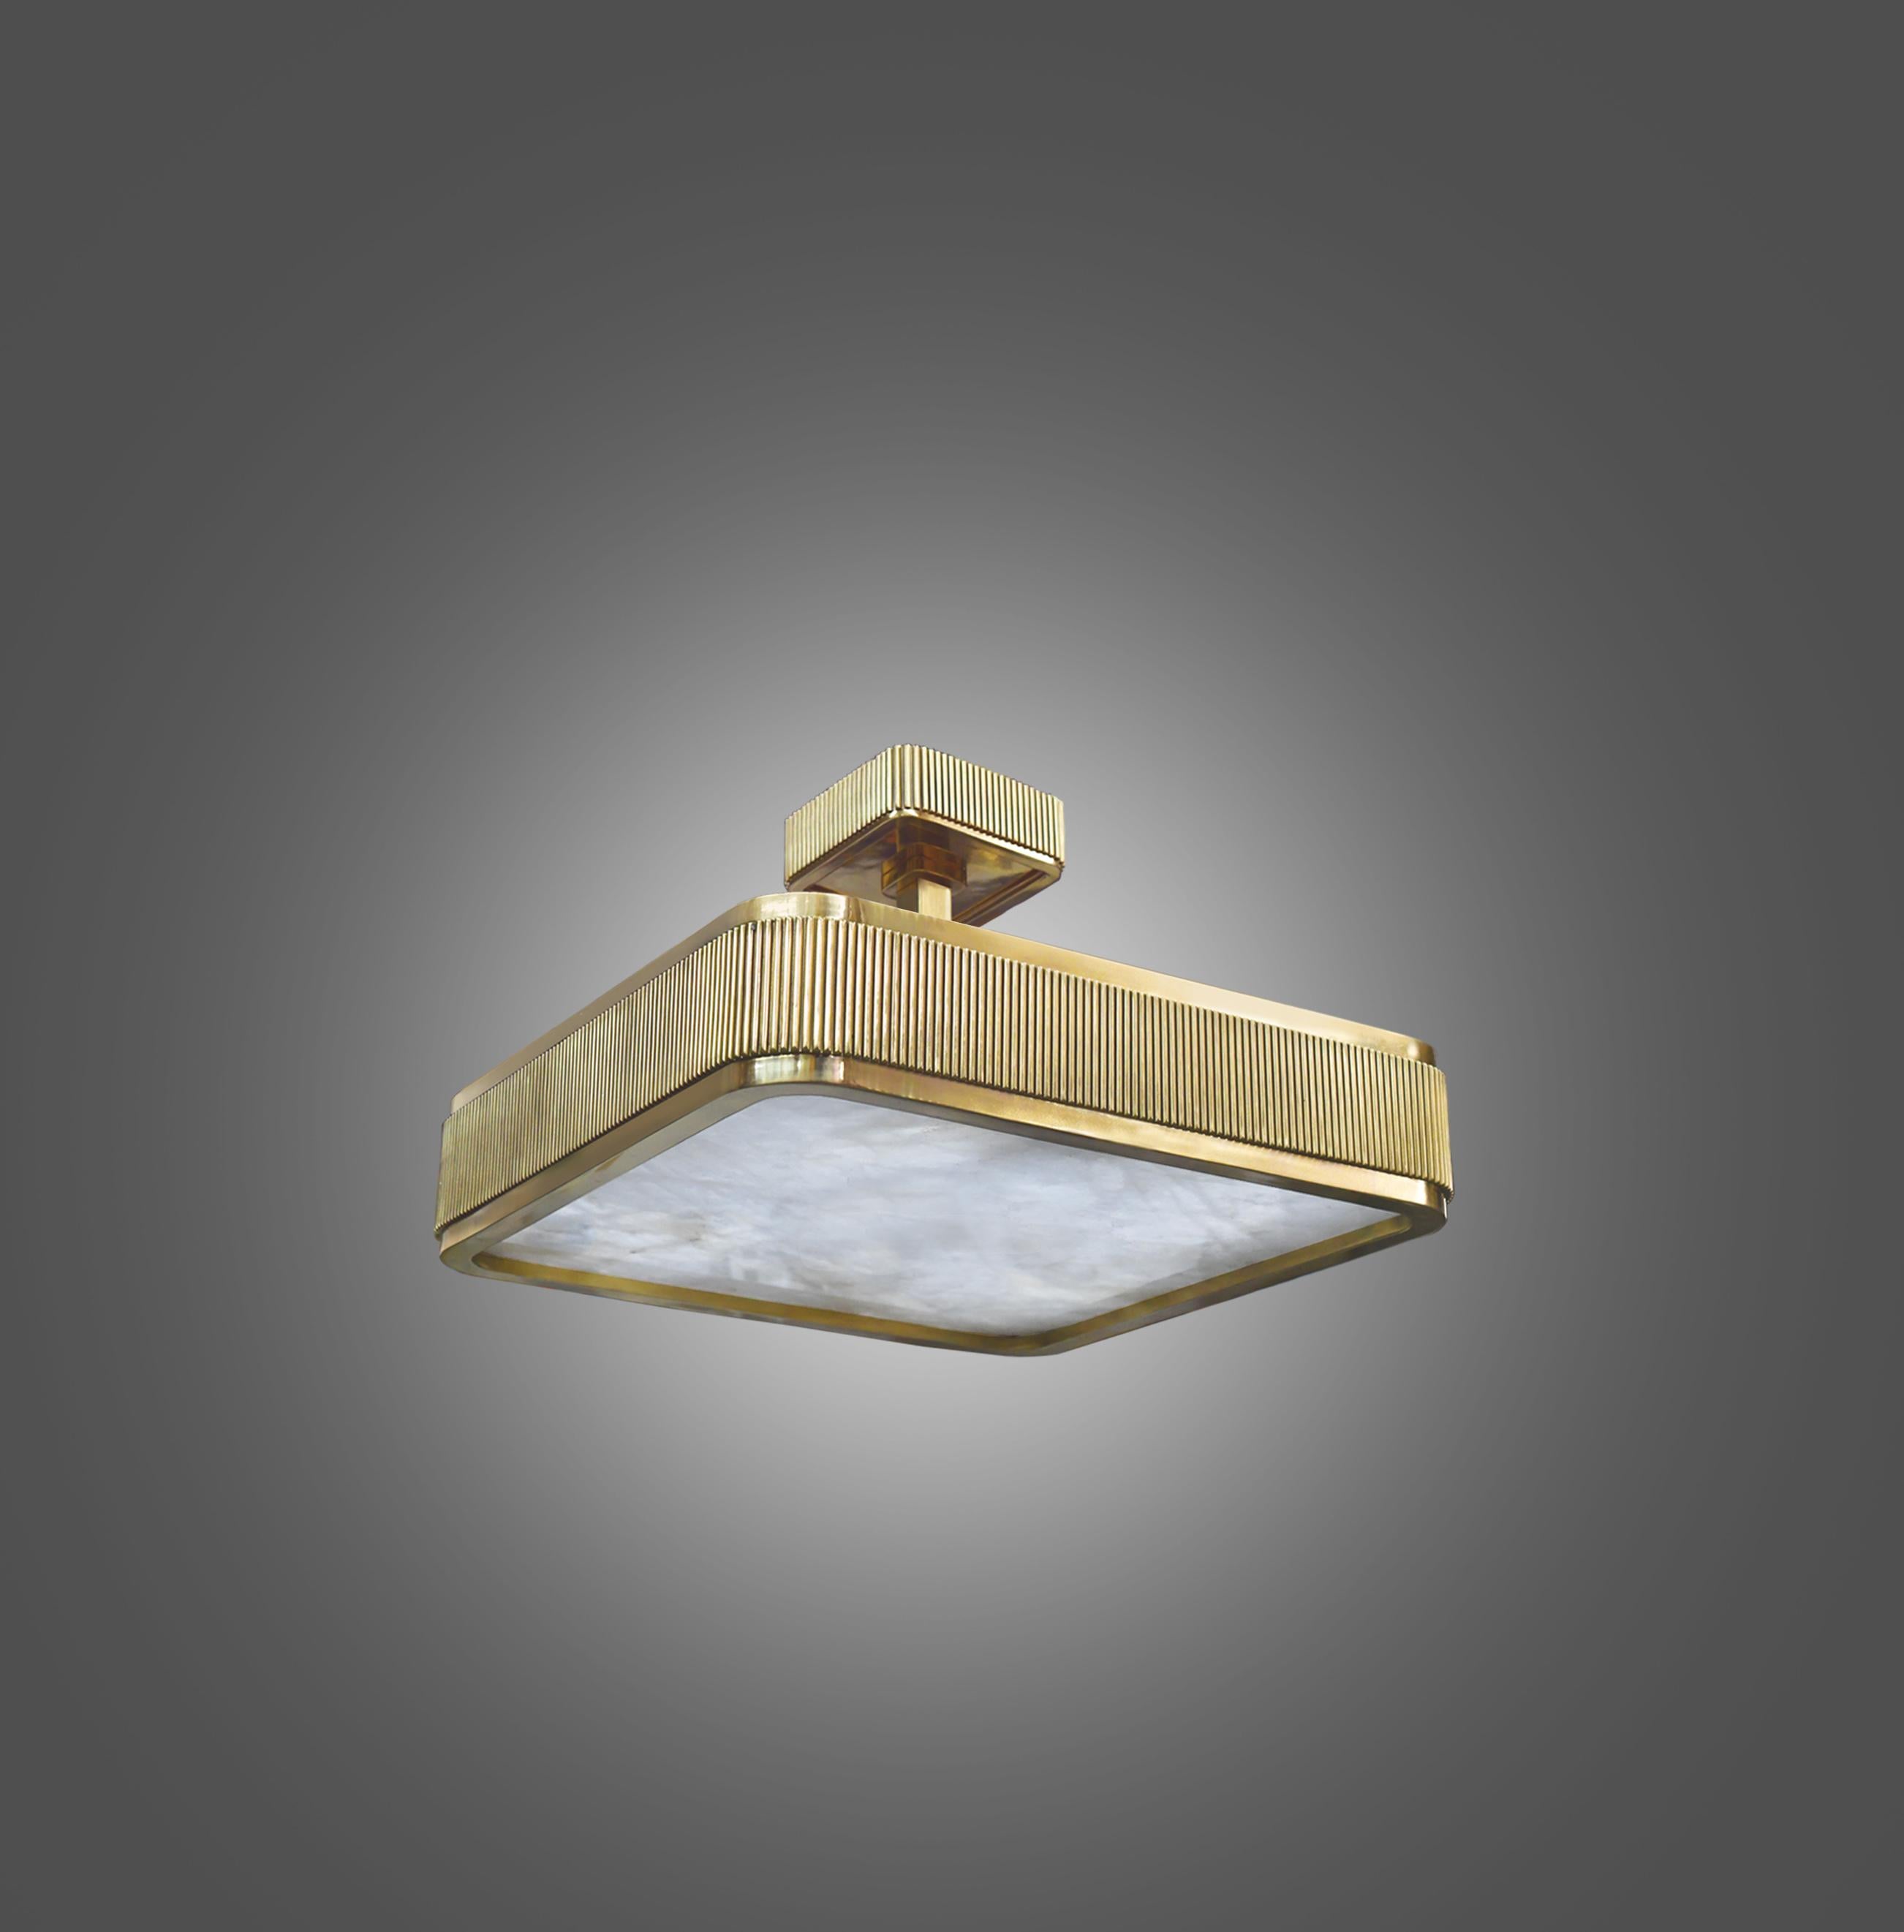 Group of two elegant form polished brass frame with rock crystal panel, BSO rock crystal semi flush mount created by Phoenix, NYC.

Height can be adjustable.

Lutron dimmer system. 
Each fixture installs four E26 base sockets. 
Use four 60W